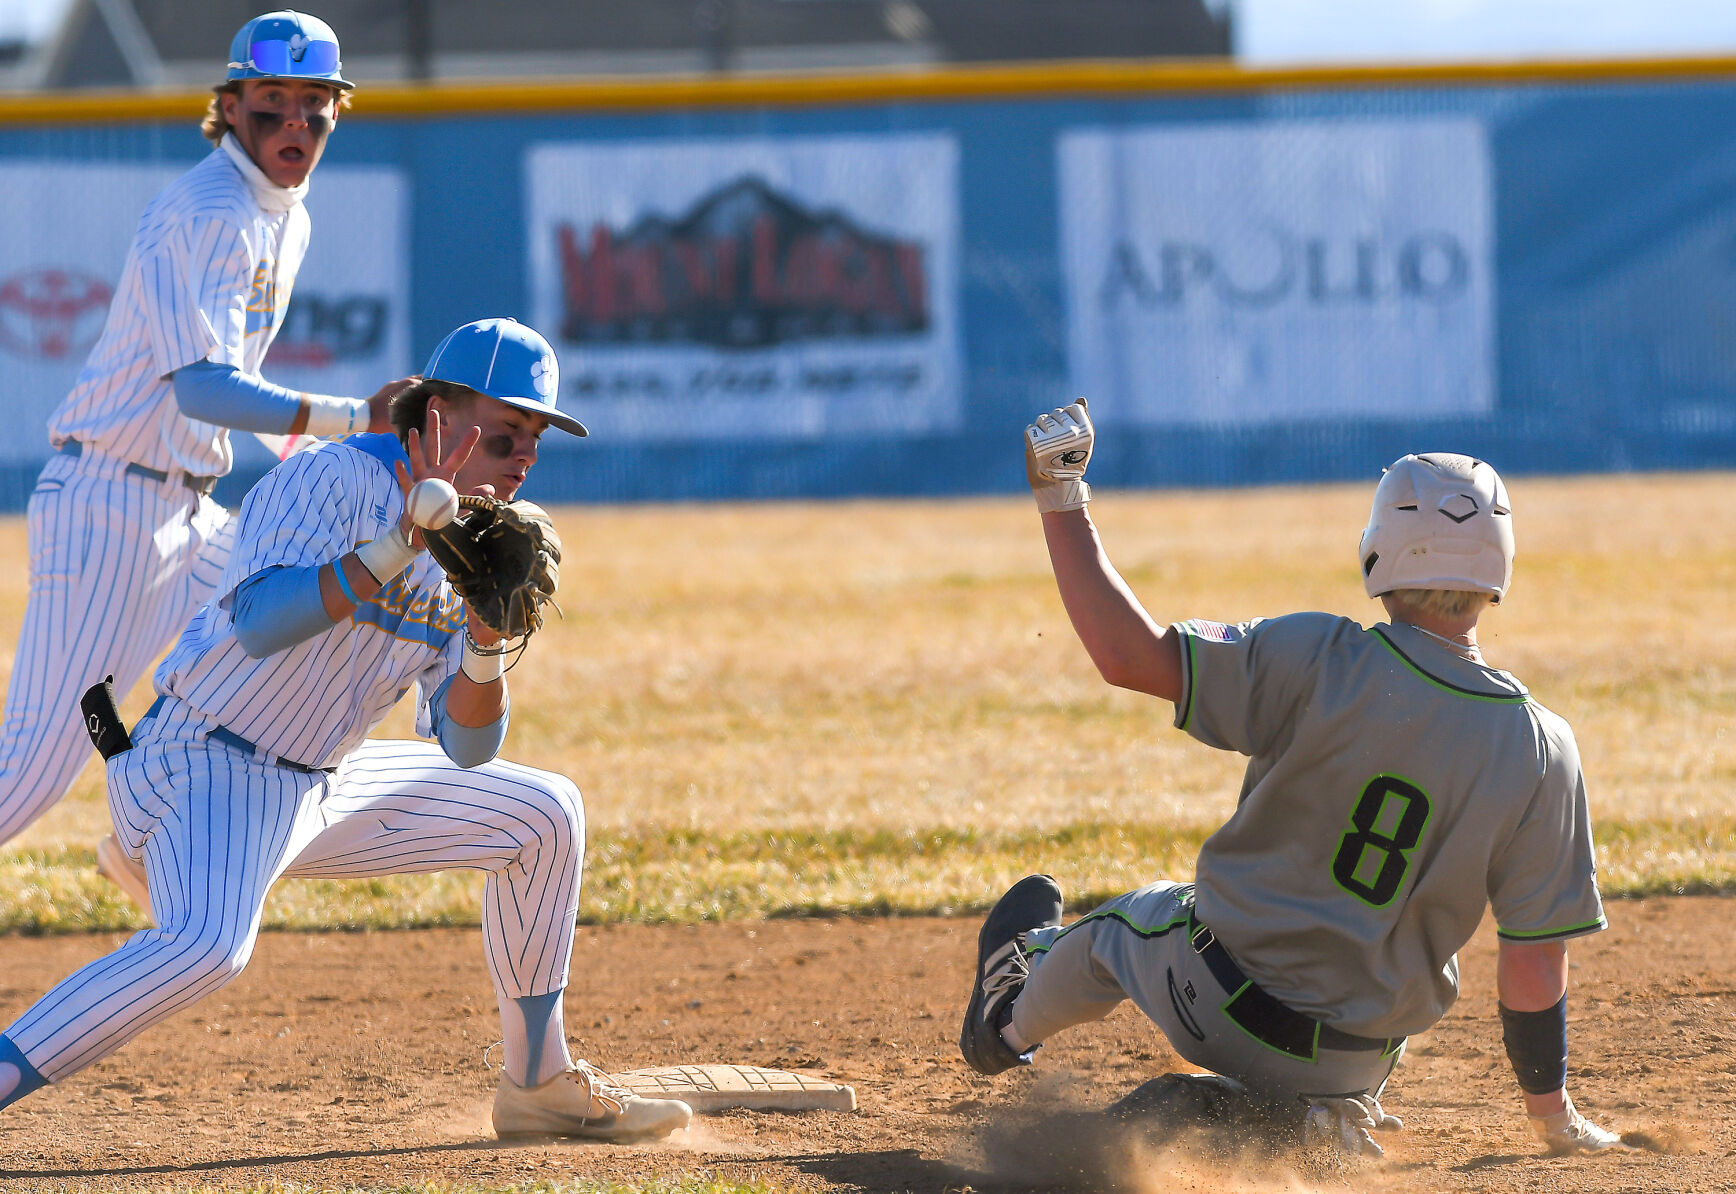 Dominant Wins for Bear River, Ridgeline, and Mountain Crest in Region 11 Baseball Series